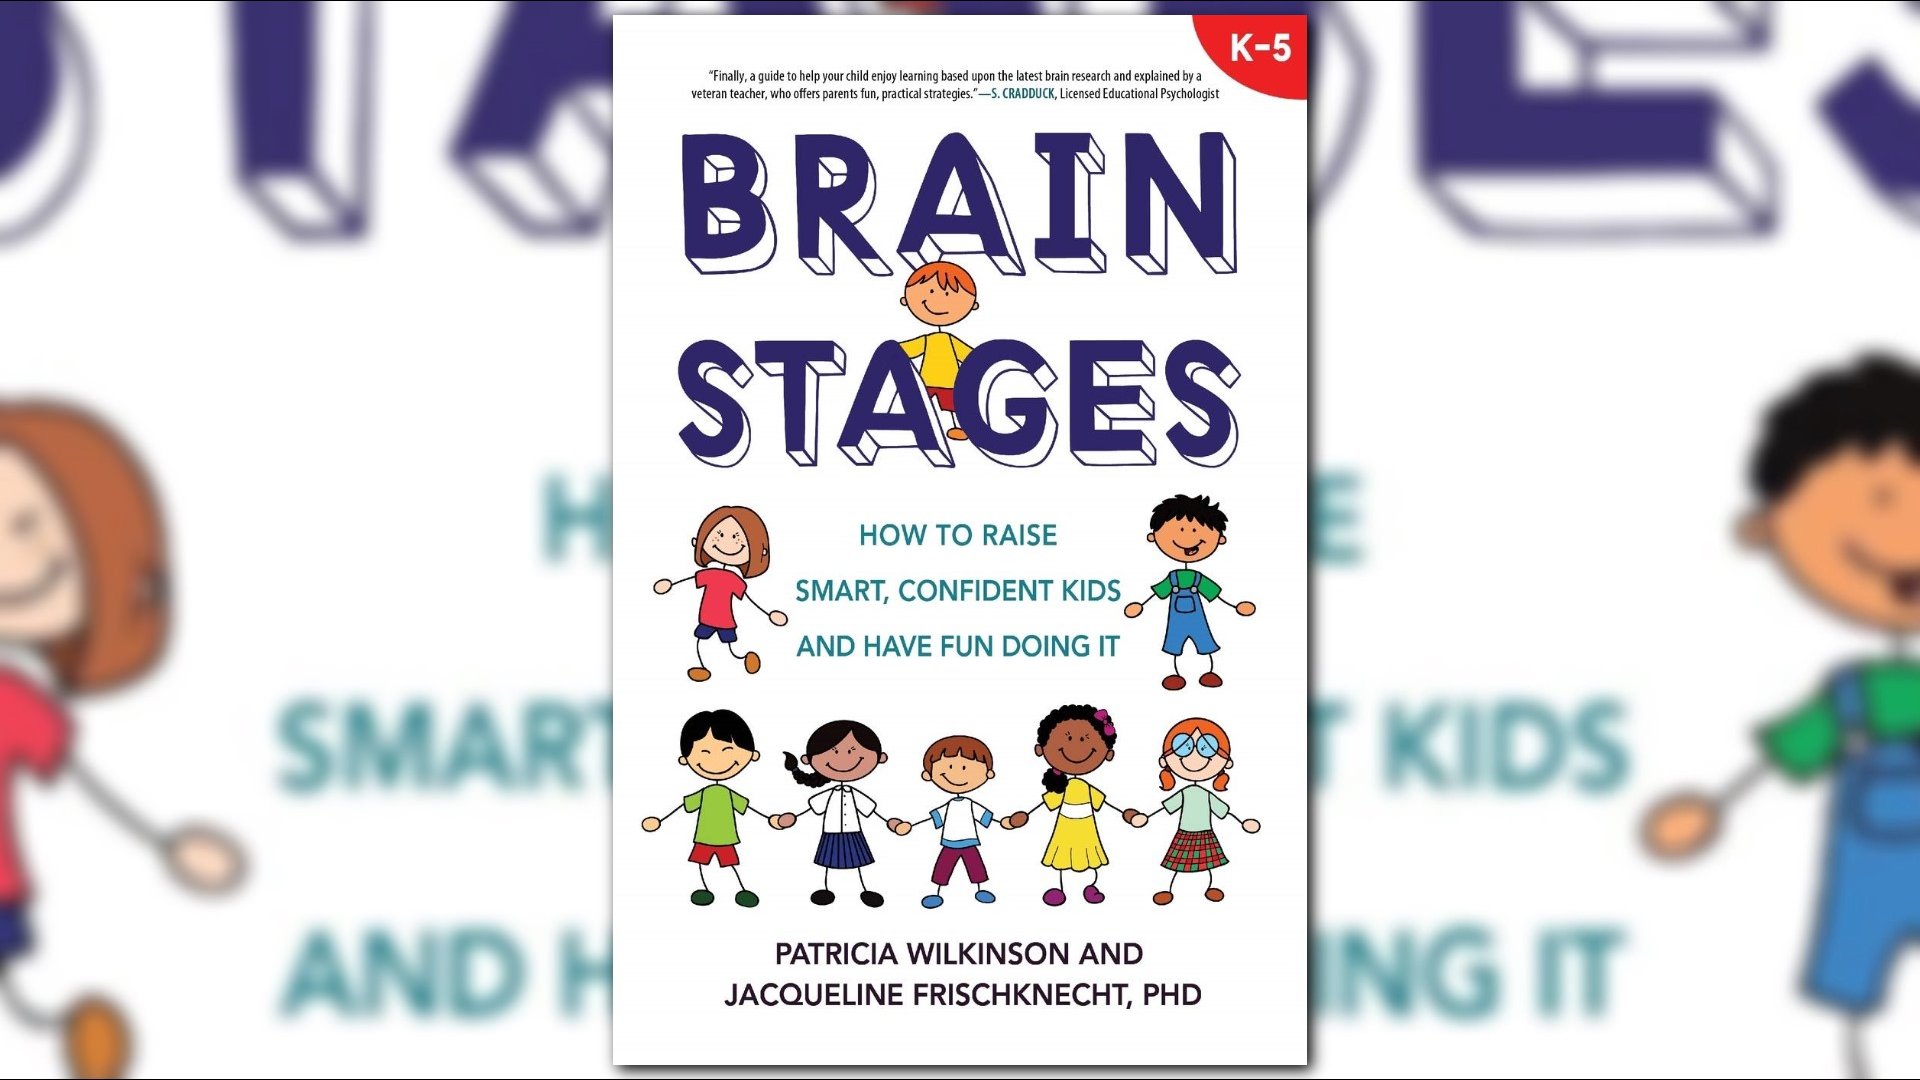 The new book 'Brain Stages' tell parents what they can do at home to give their children a head start academically and socially.